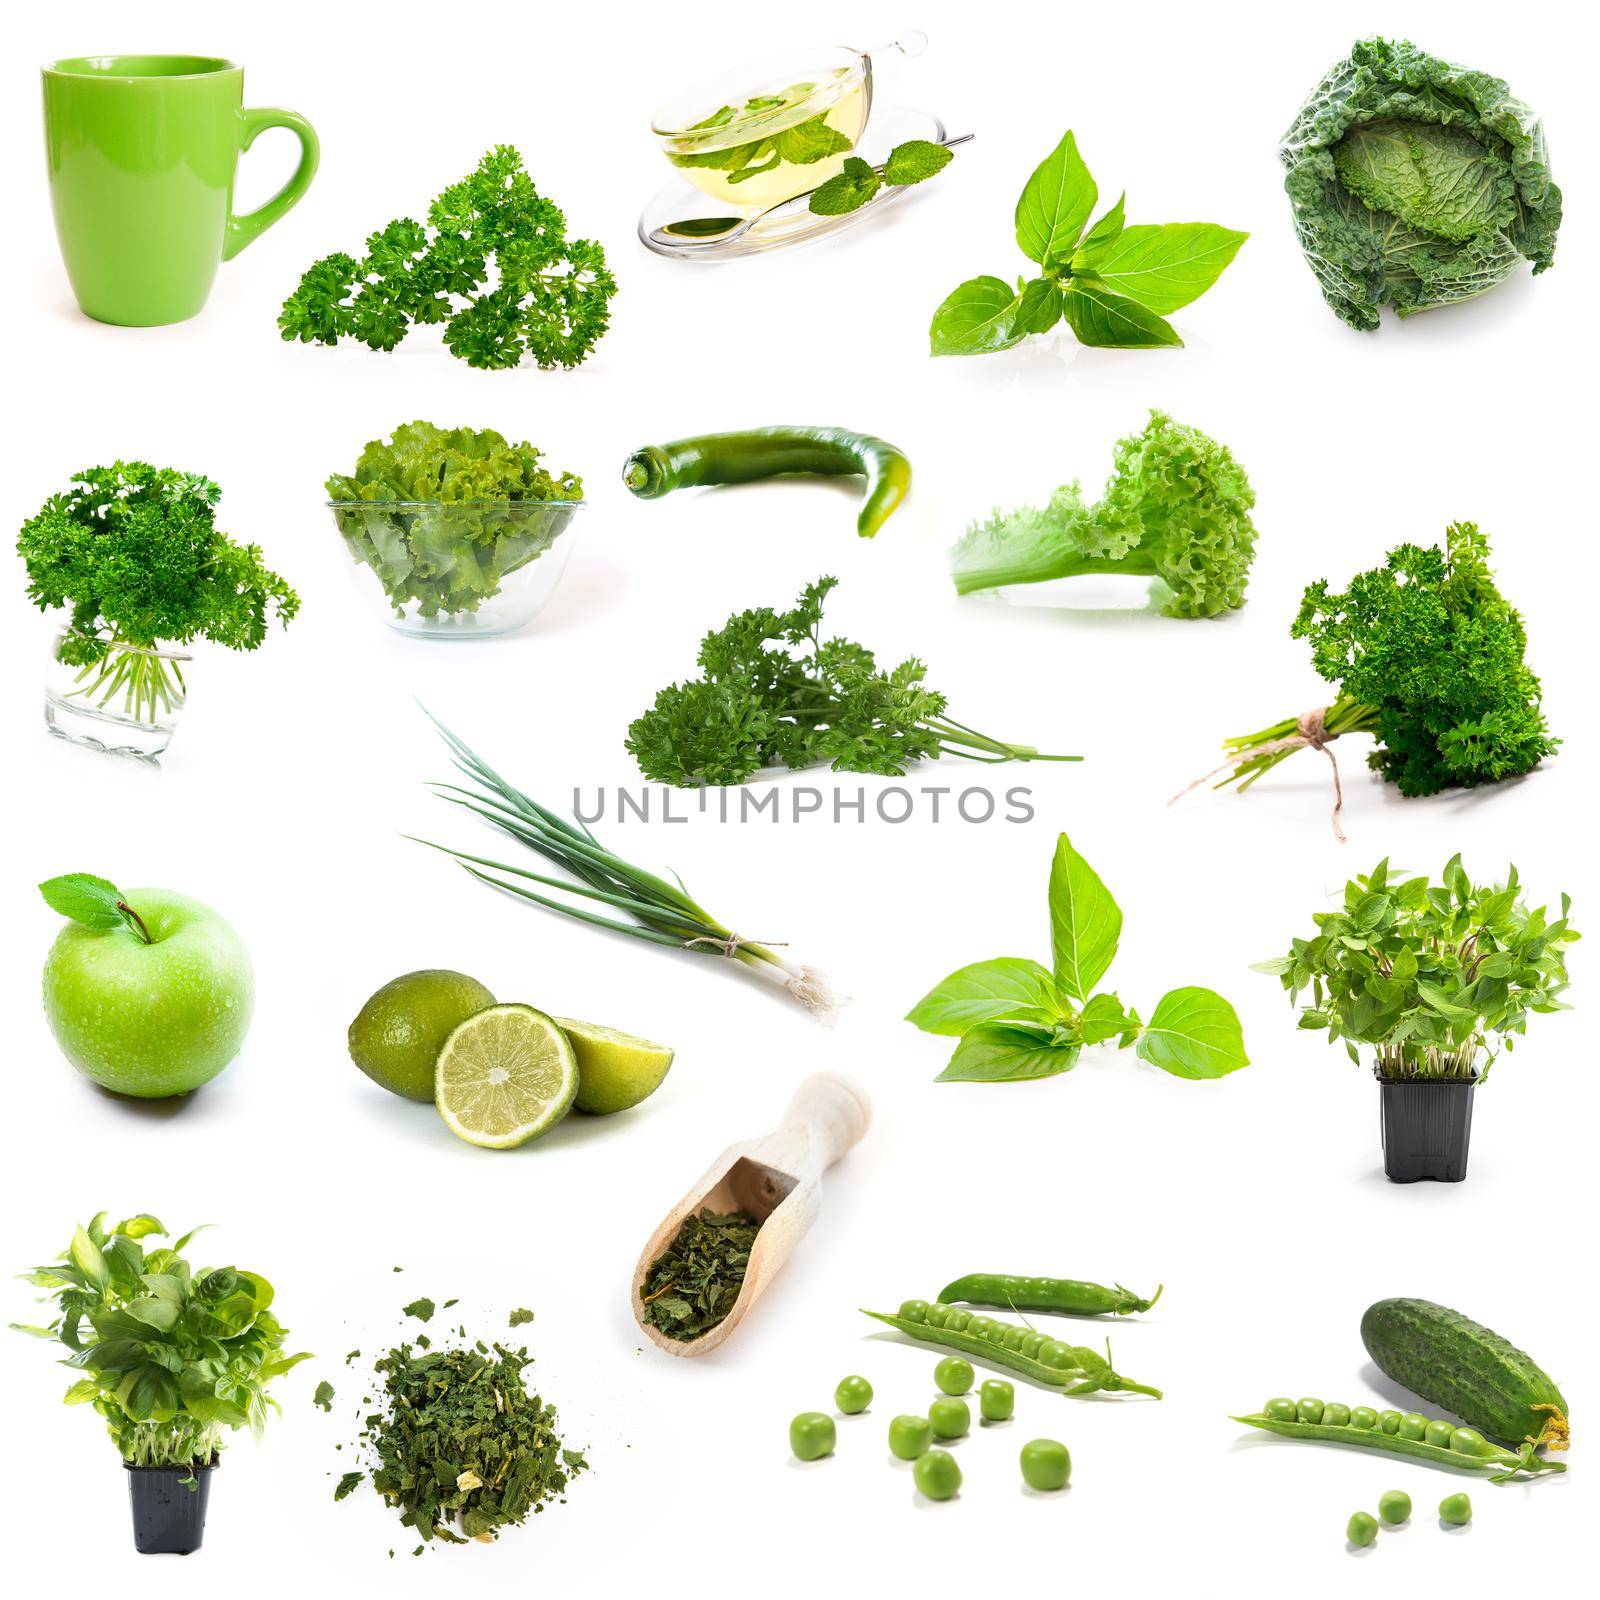 green products collage isolated on white background